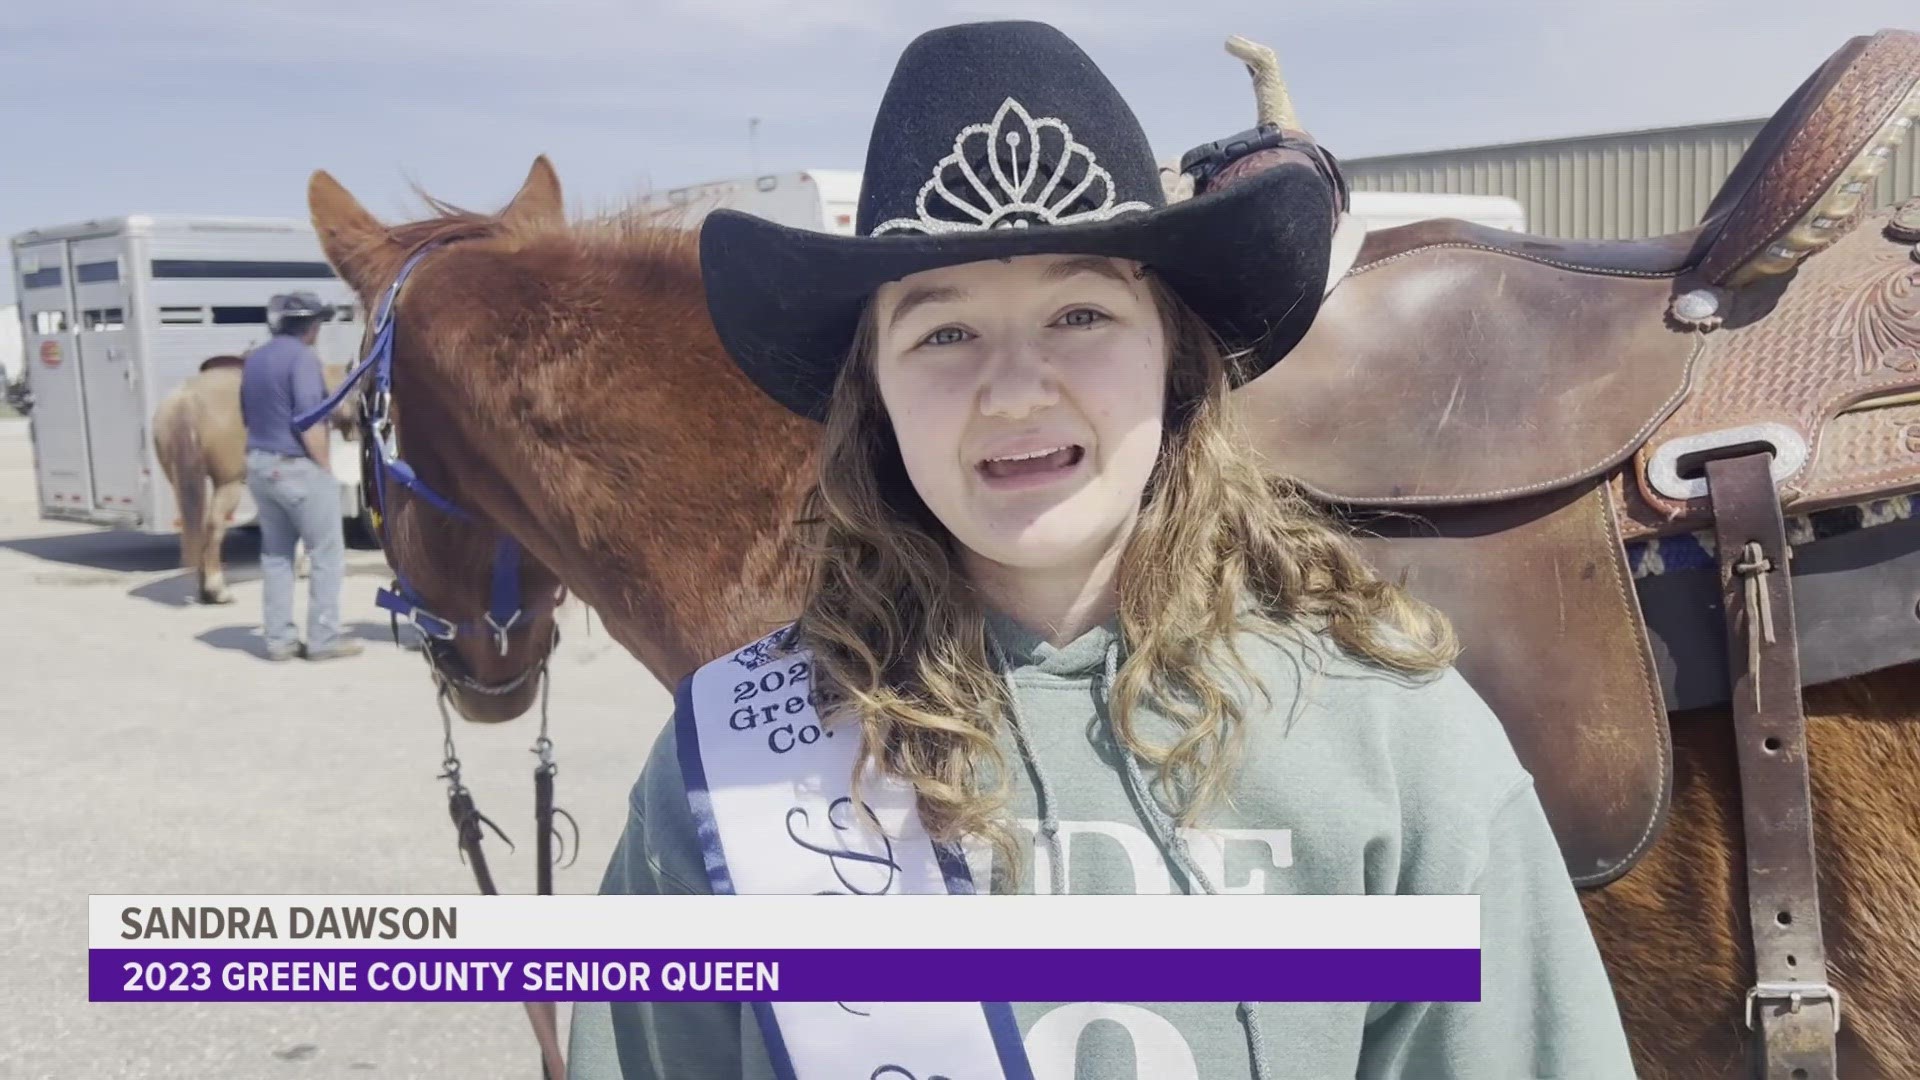 Local 5 spoke with the Greene County Senior QUeen about her favorite part of the Pony Express.